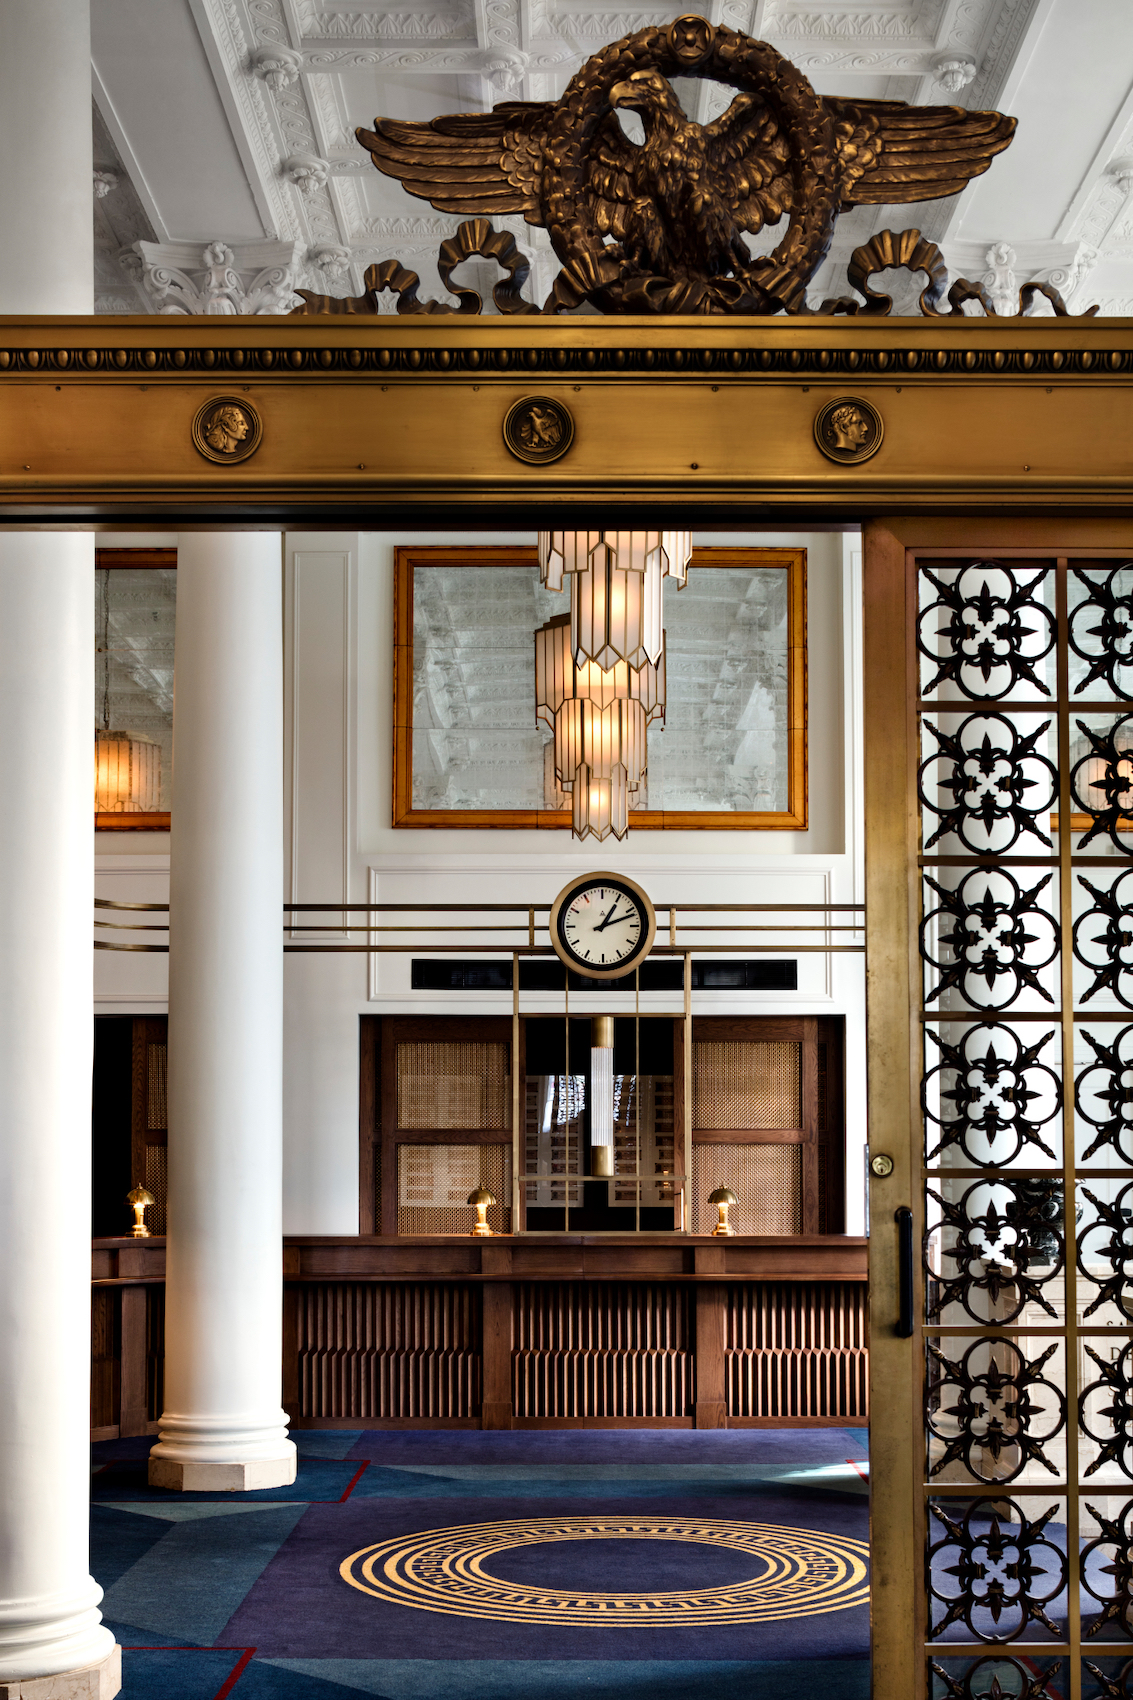 Reception at Riggs Hotel in Washington DC – a former bank – restored and designed by the Lore Group